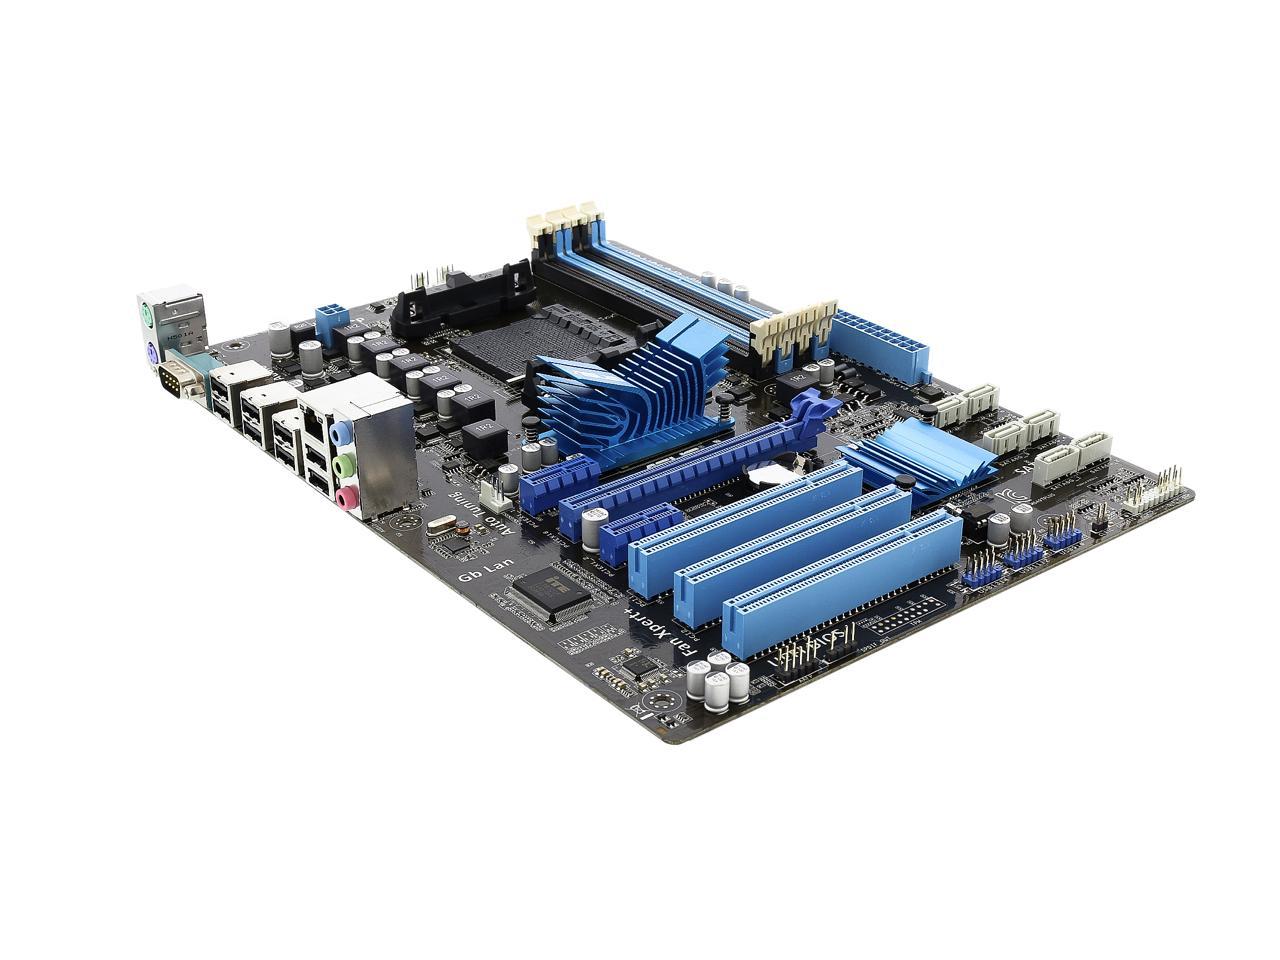 Used - Very Good: ASUS M5A97 PLUS AM3+ ATX AMD Motherboard - Newegg.com